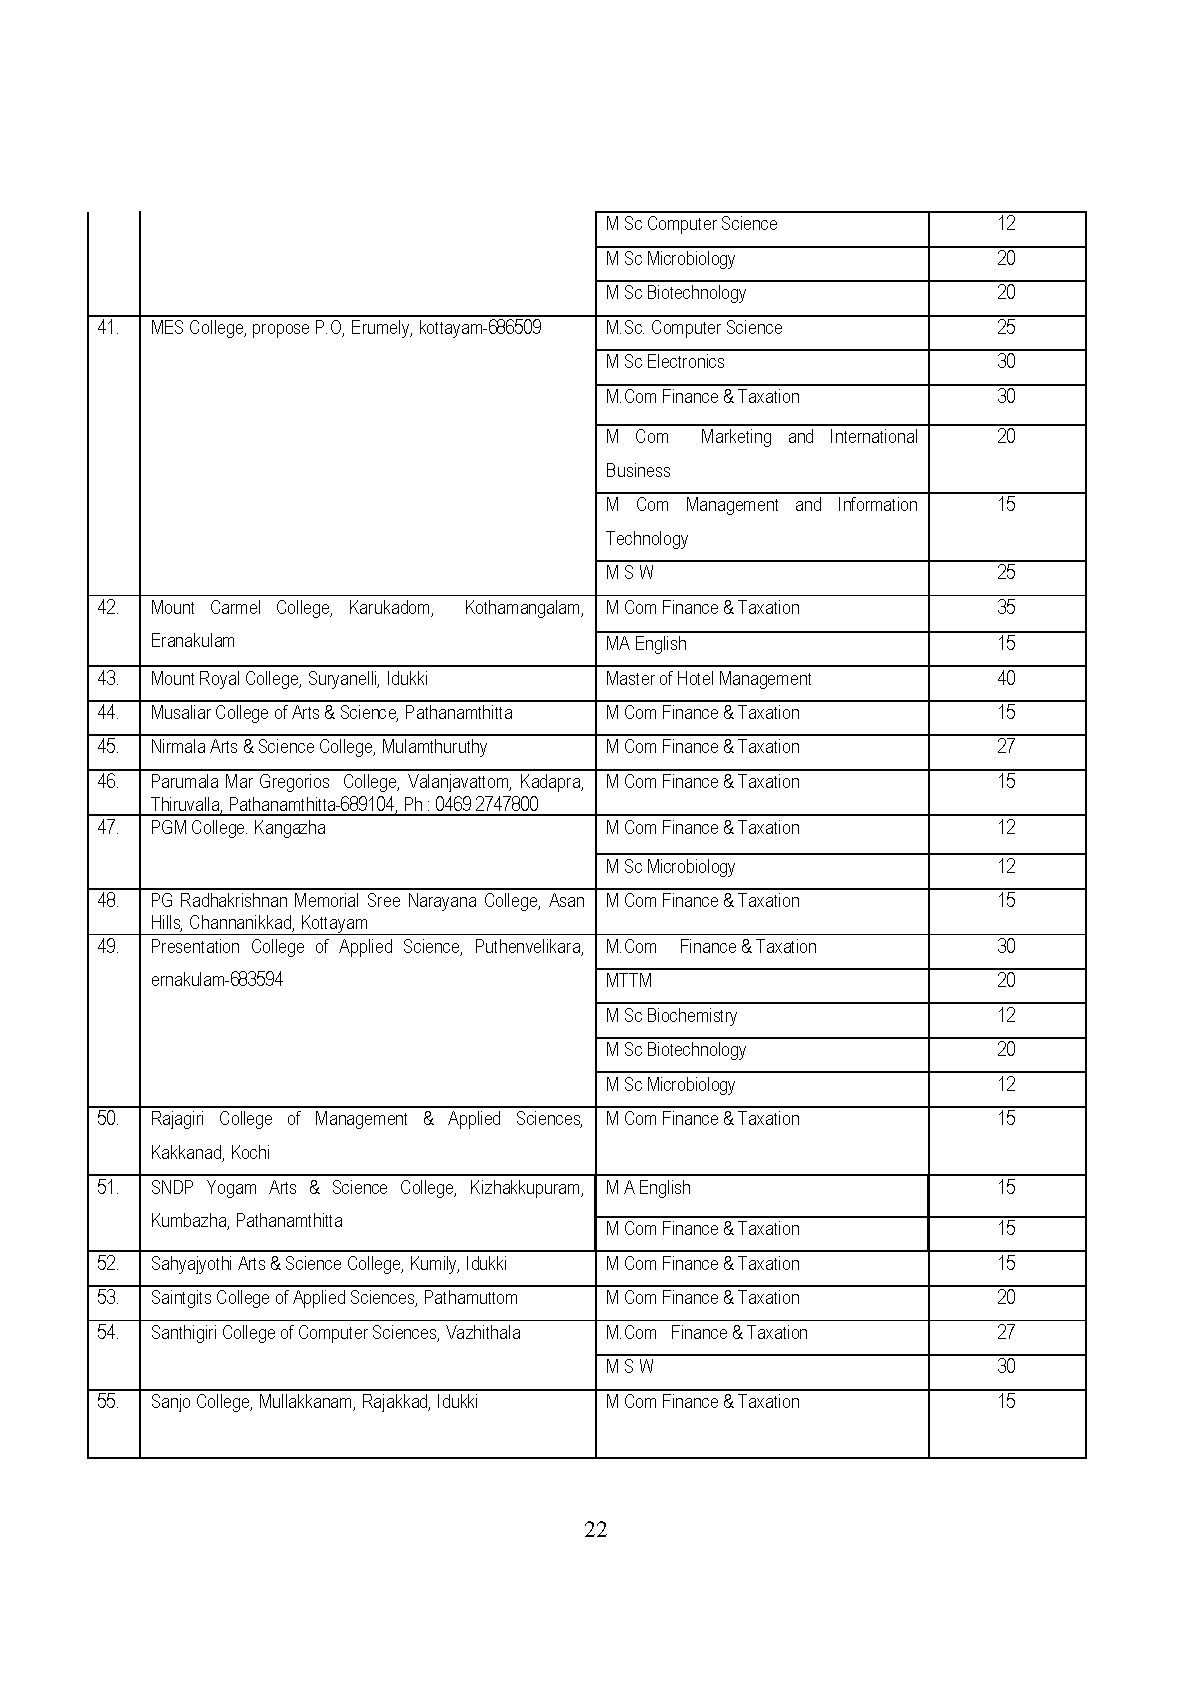 List of Unaided Arts and Science Colleges of MG University 2019 - Notification Image 5